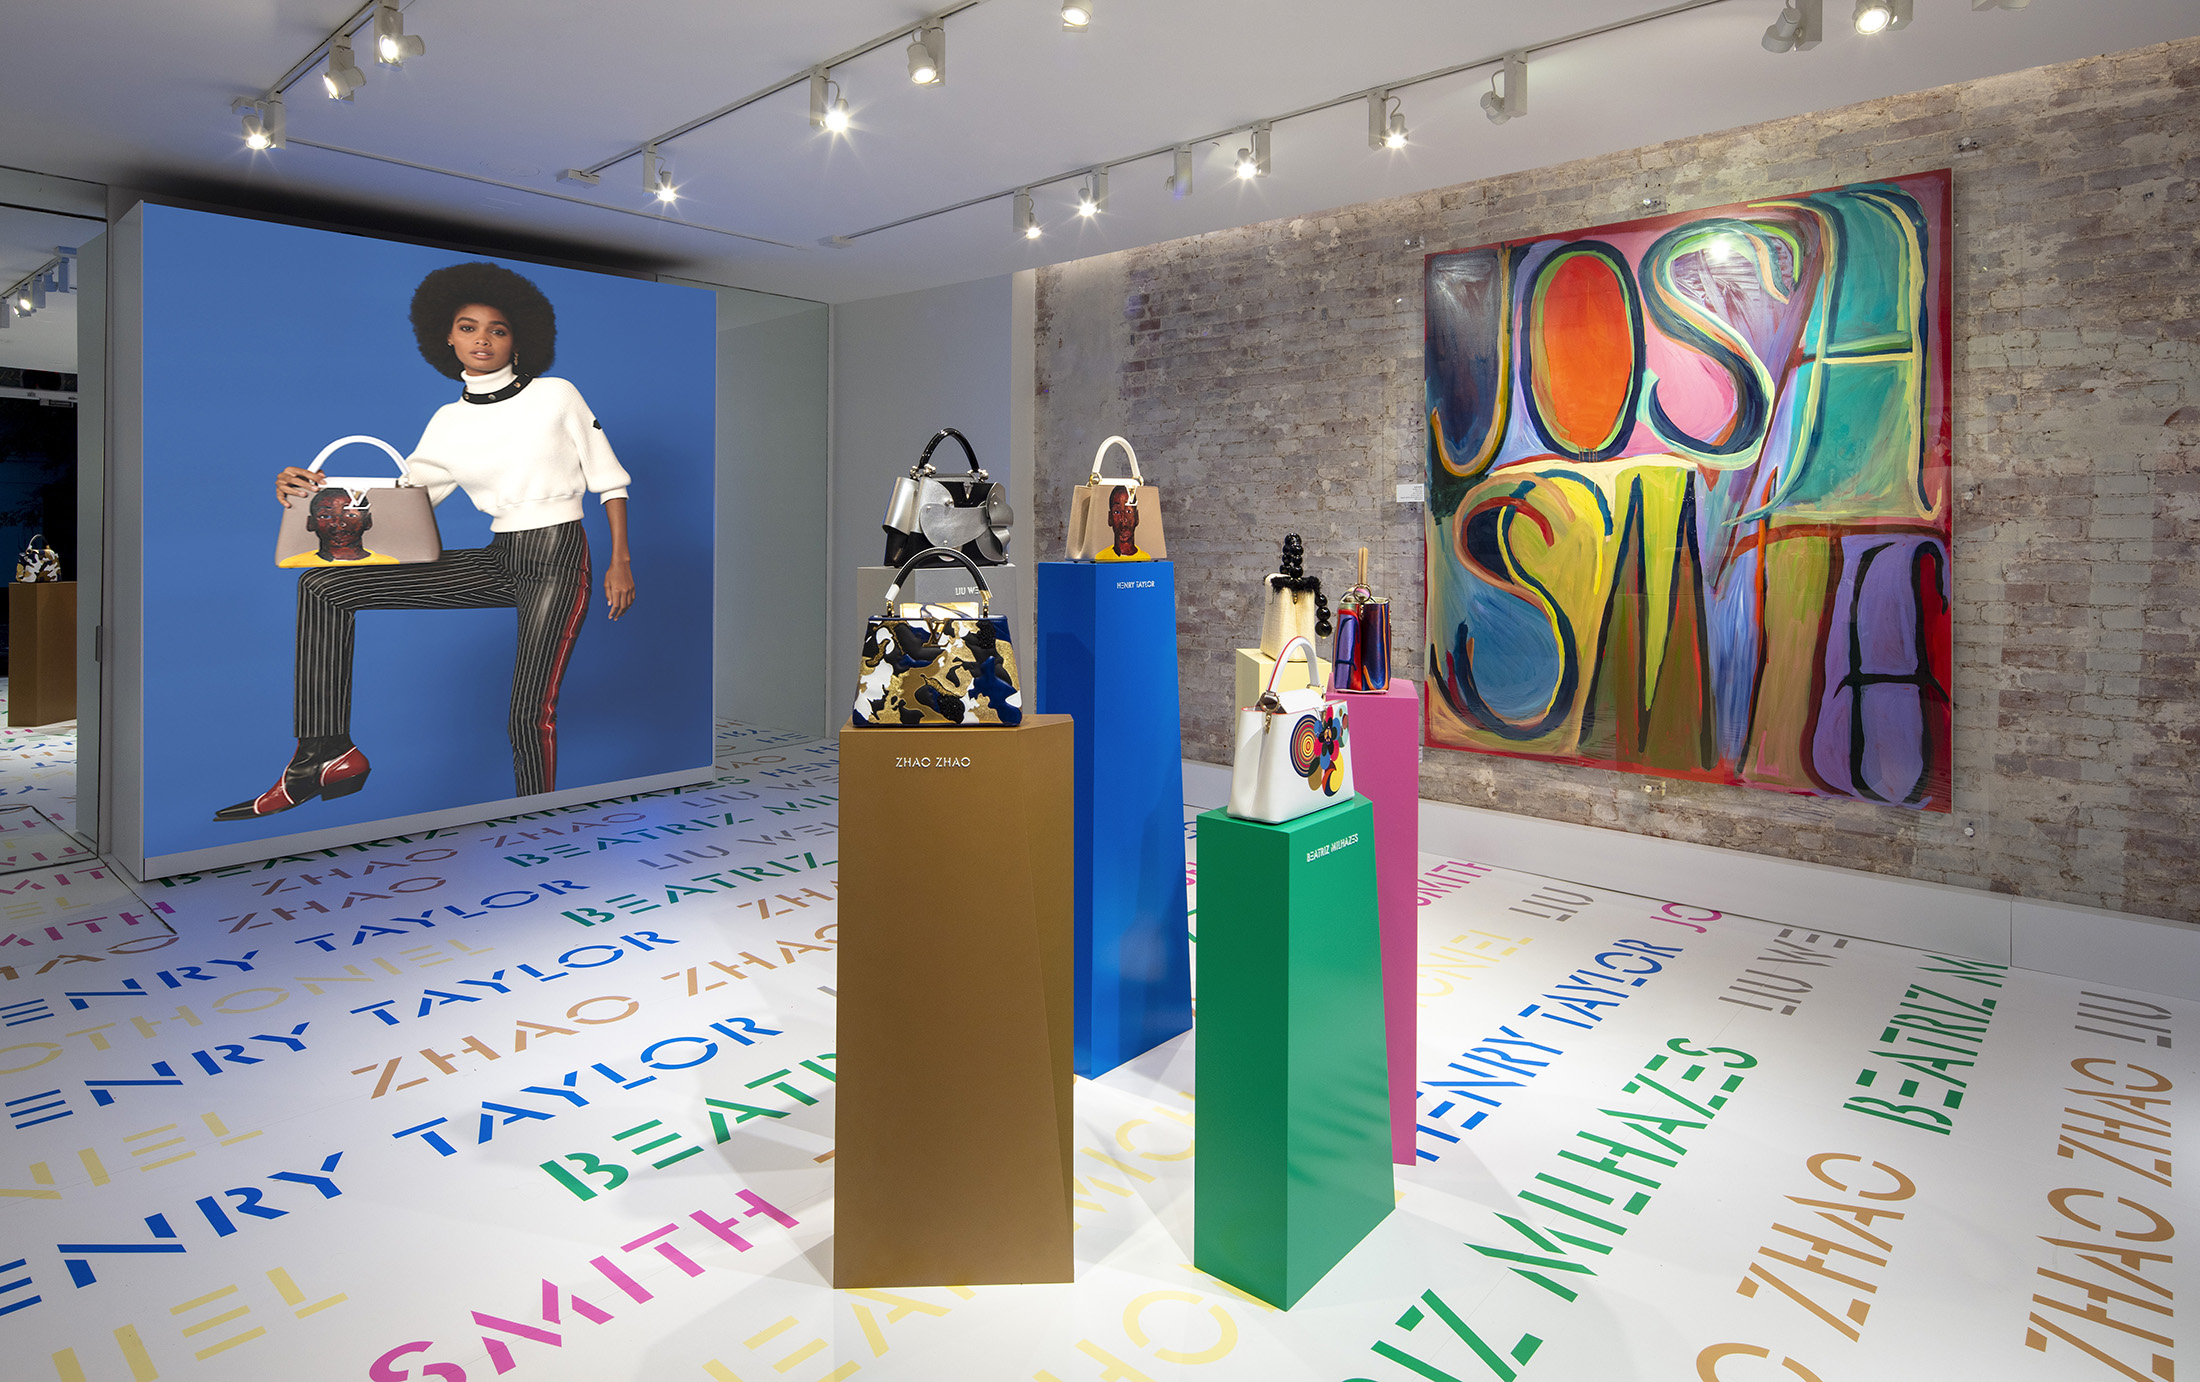 Louis Vuitton Opens Artycapucines Gallery At SoHo NY Store